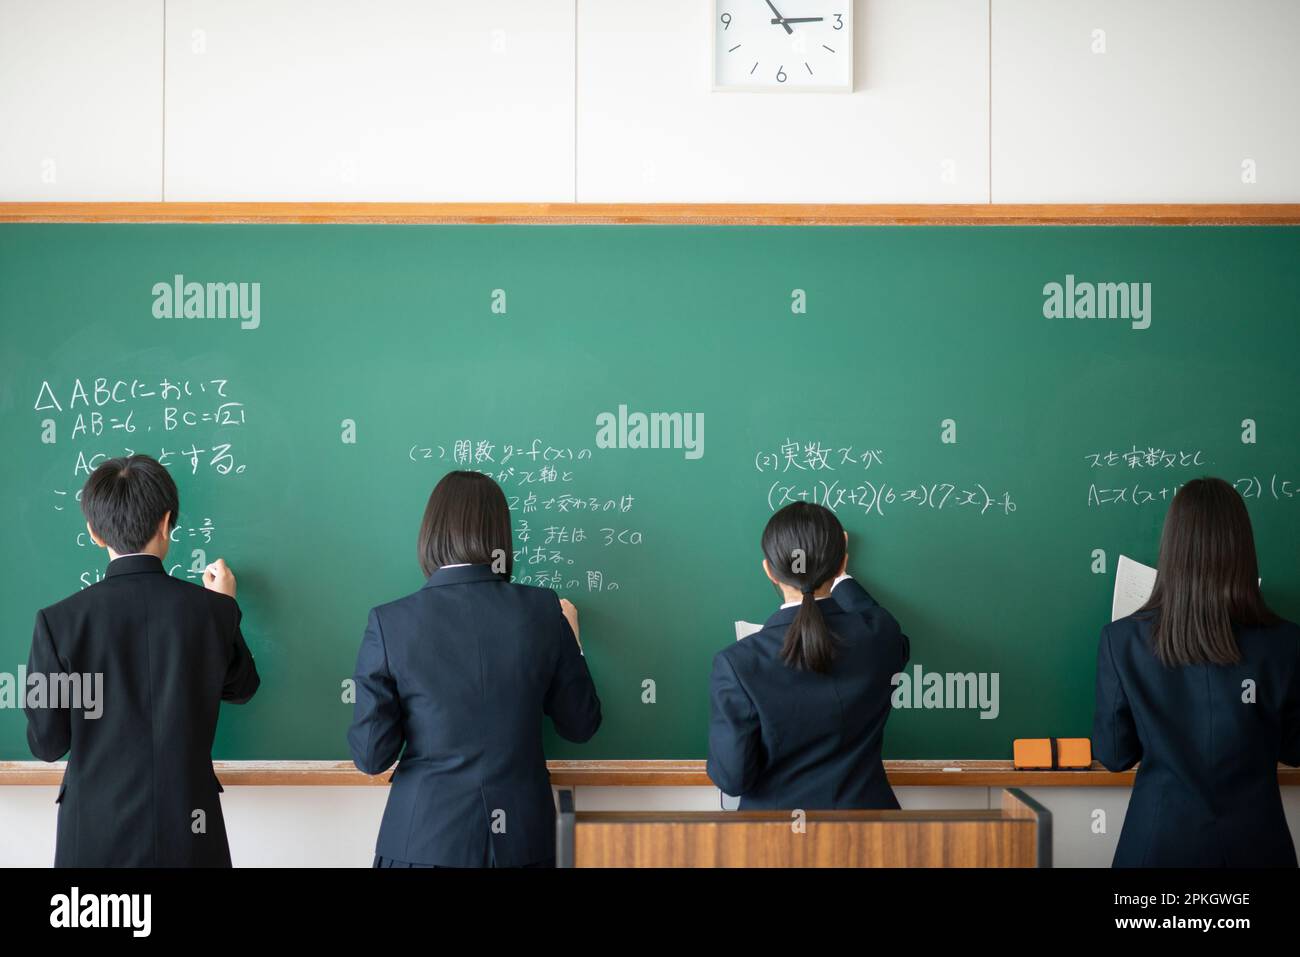 Back view of a student writing answers on the blackboard with chalk Stock Photo